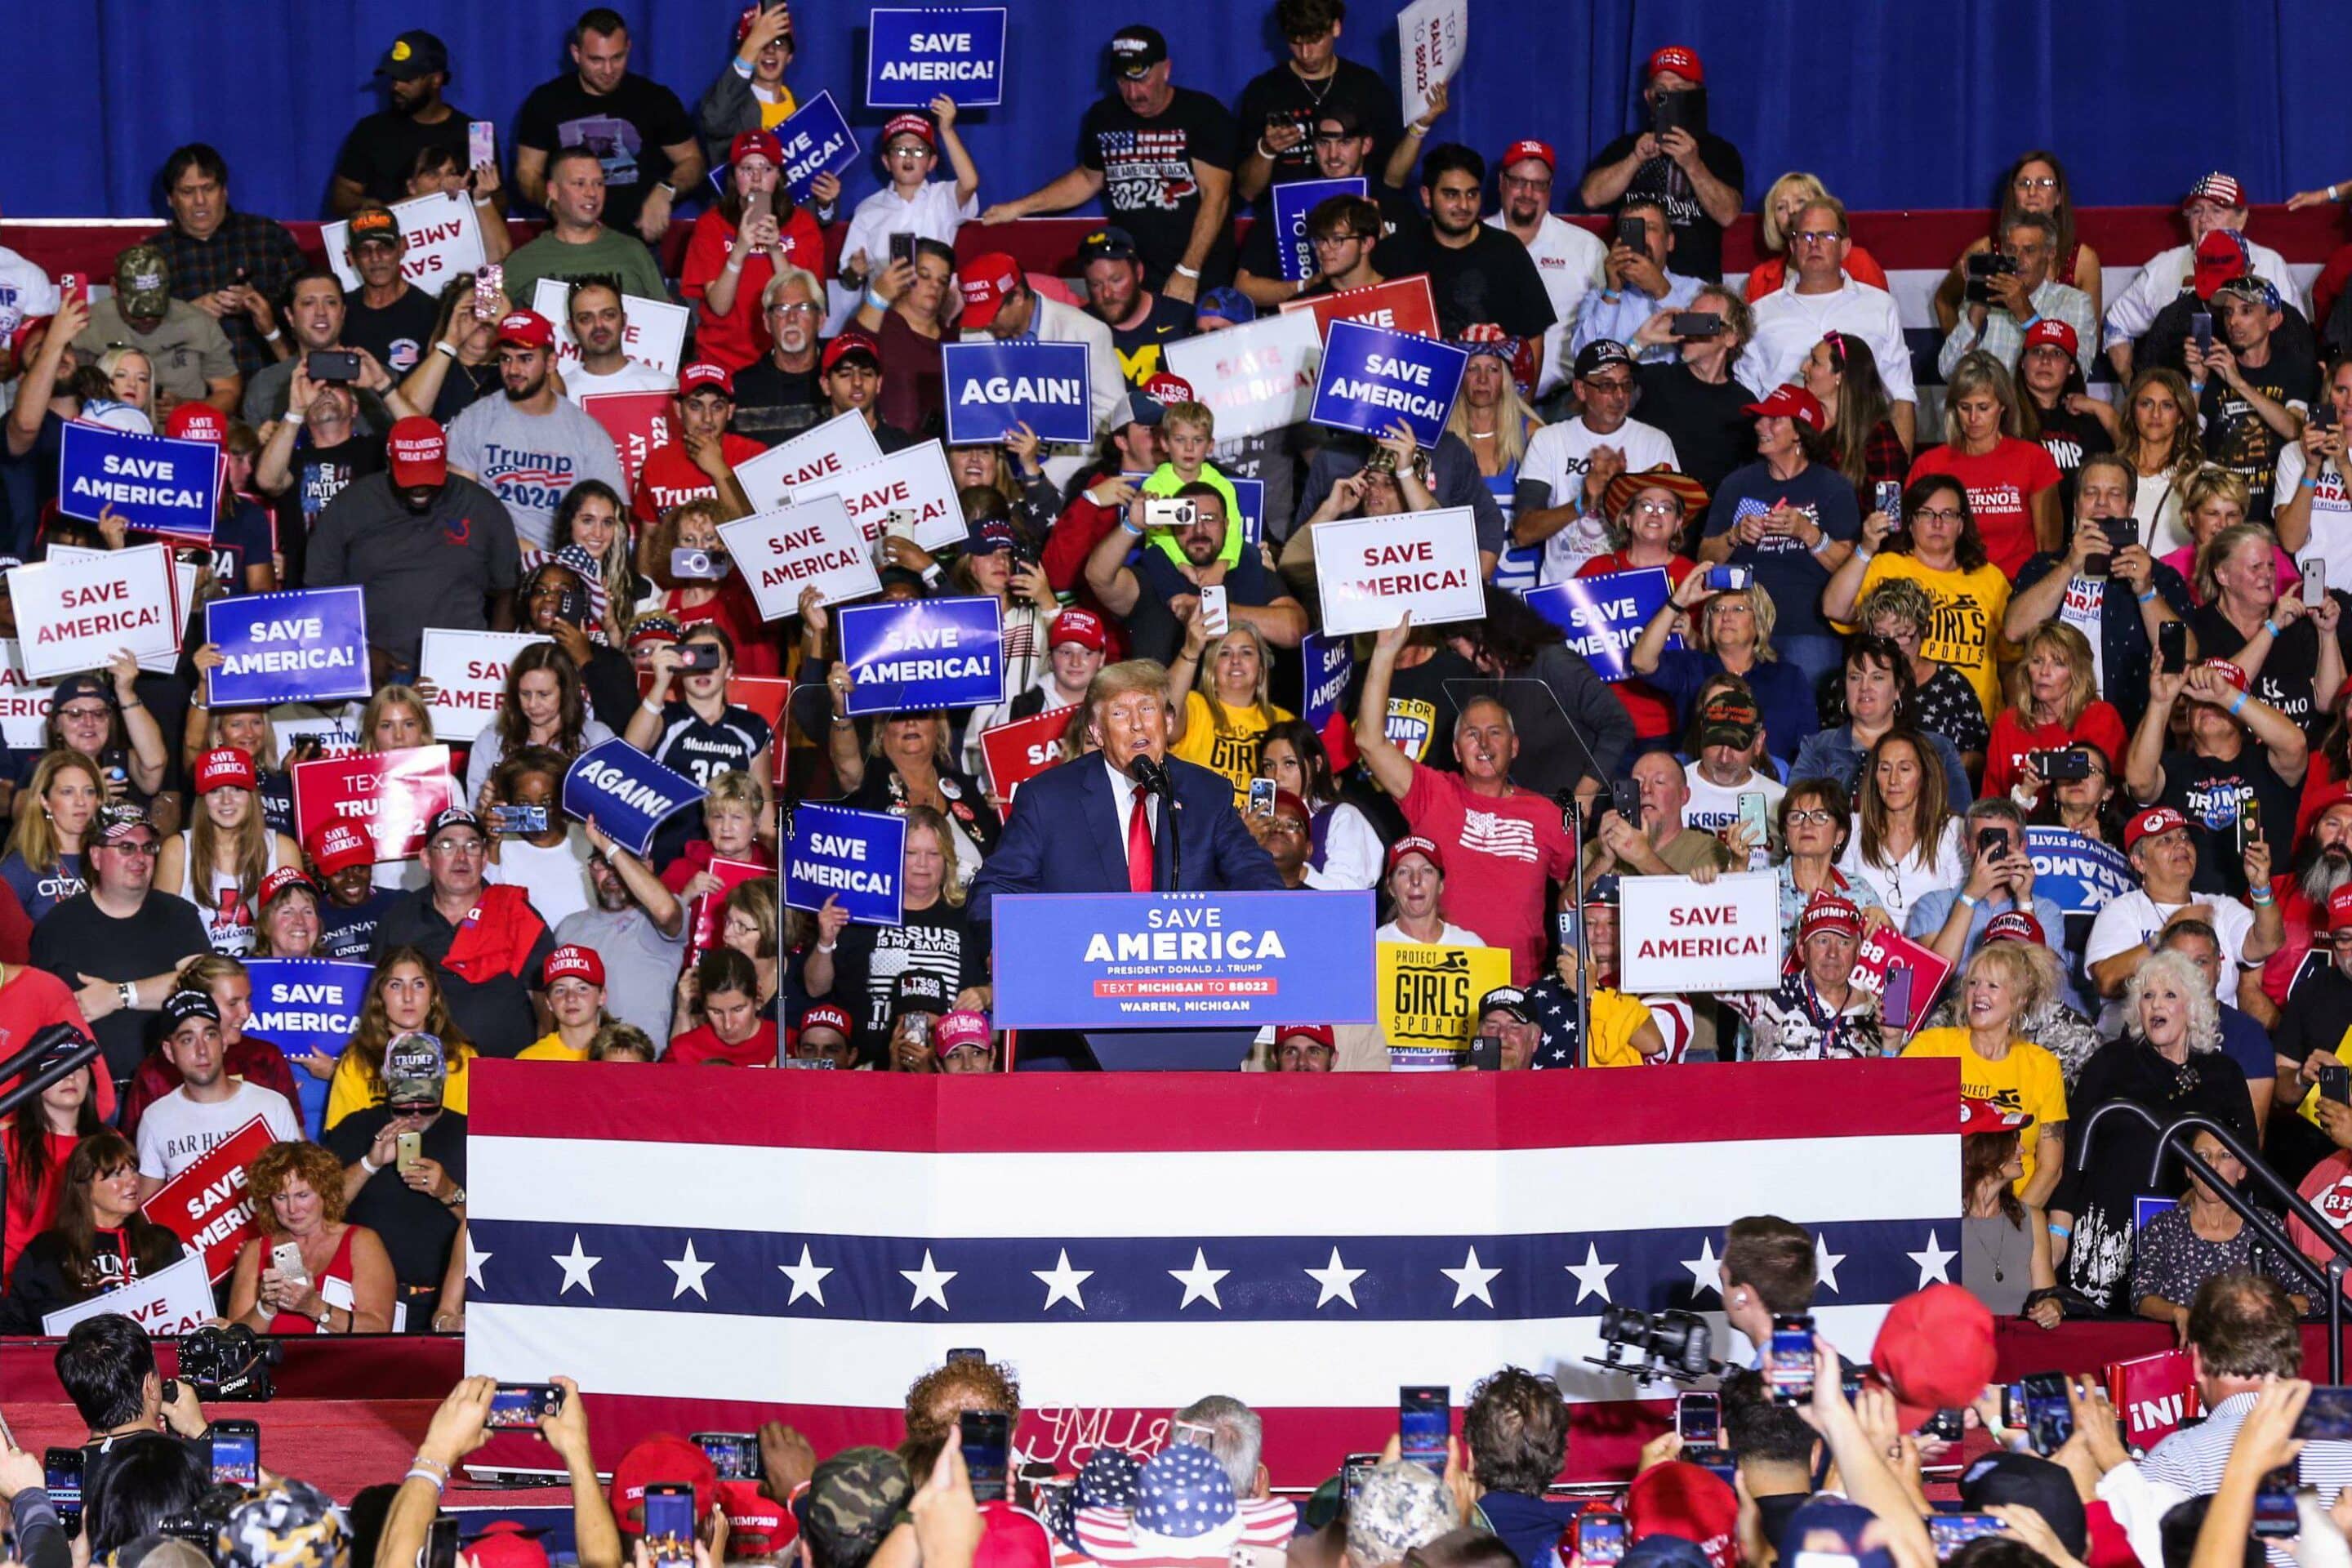 Mandatory Credit: Photo by Amanda Jones/Shutterstock (13434680o)
Former US President Donald Trump acknowledges the crowd at a Save America rally at the Macomb Community College, Sports & Expo Center
Save America rally, Macomb Community Center, Warren, Michigan, USA - 30 Sep 2022/shutterstock_editorial_Save_America_rally_Macomb_Comm_13434680o//2210020753